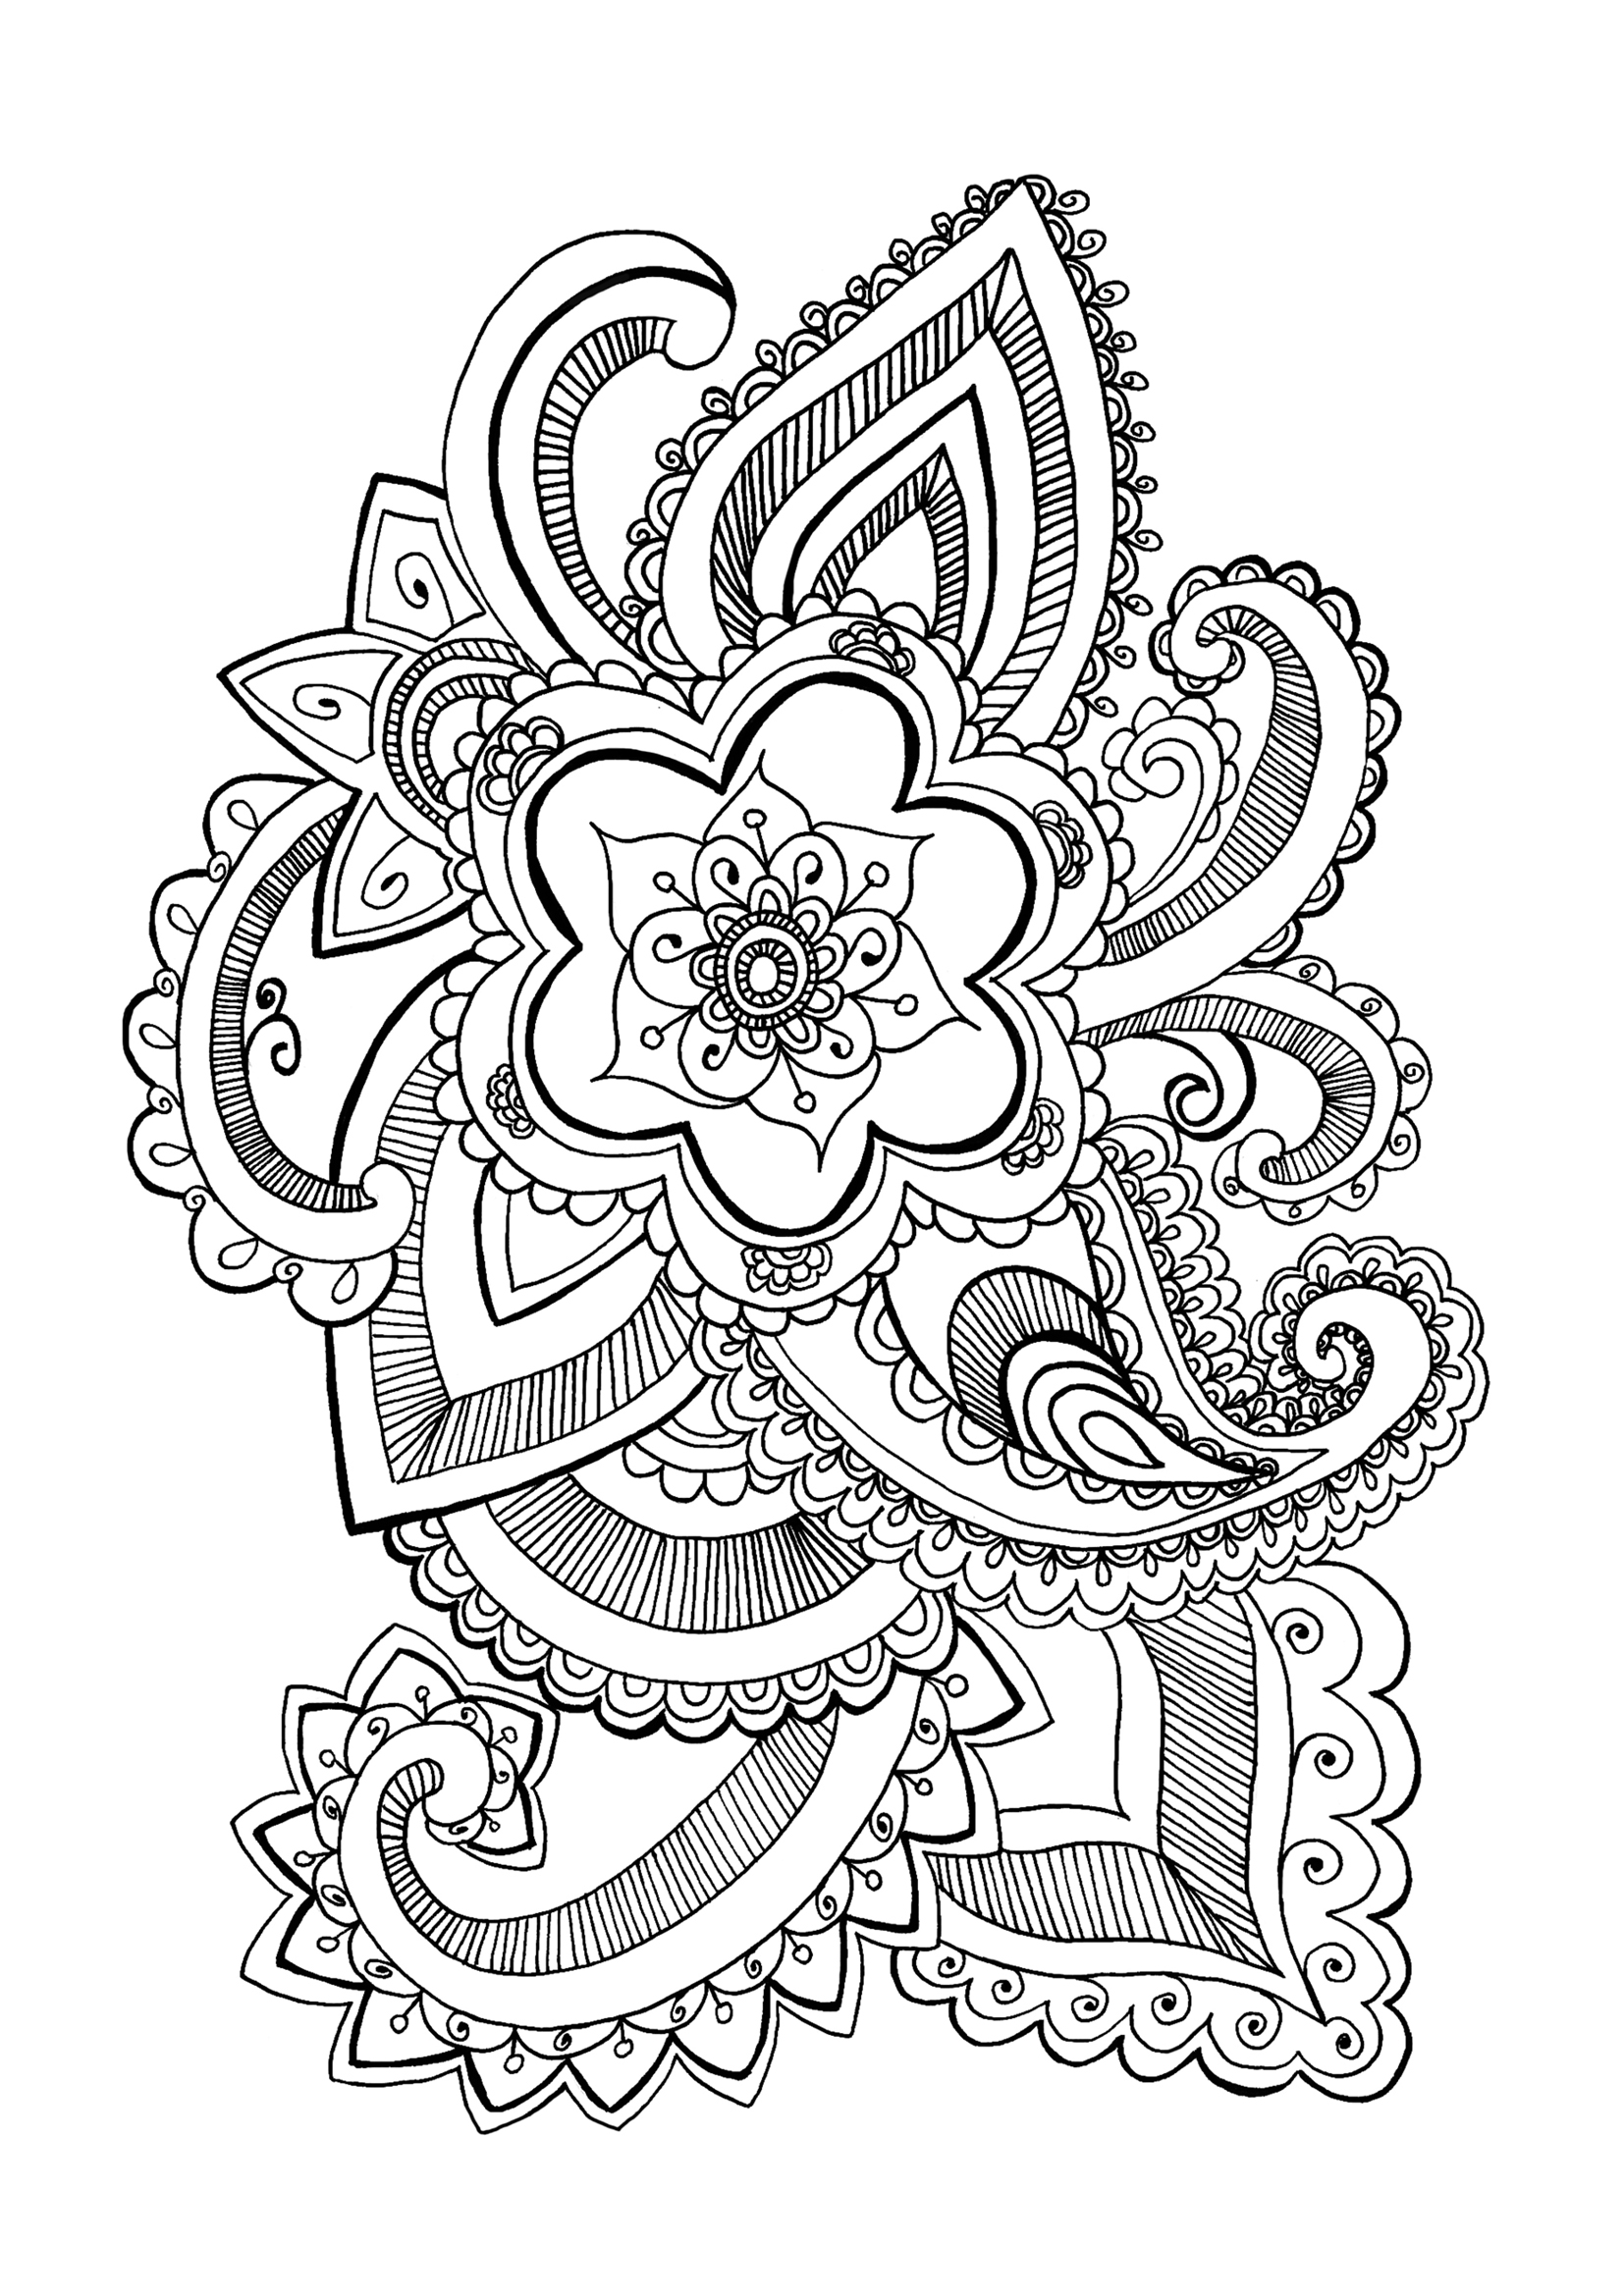 Download Flower Mandala Coloring Pages - Best Coloring Pages For Kids